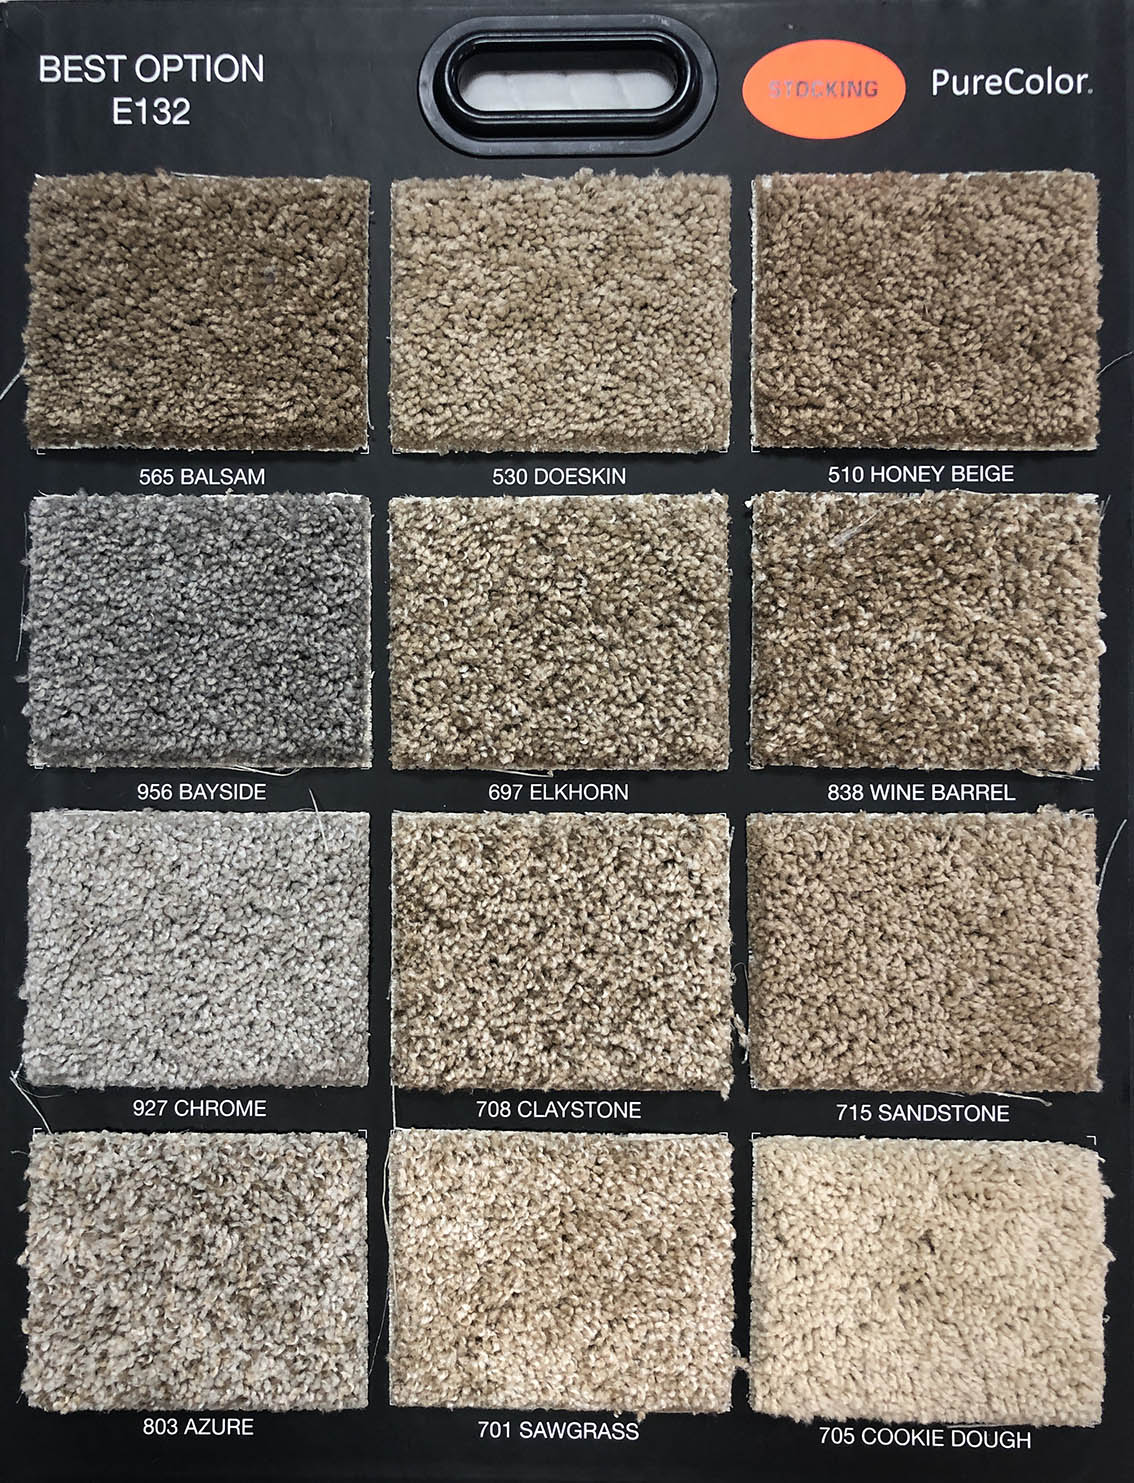 Budget carpet great for rentals or selling your home!$1.99sq ft installed.